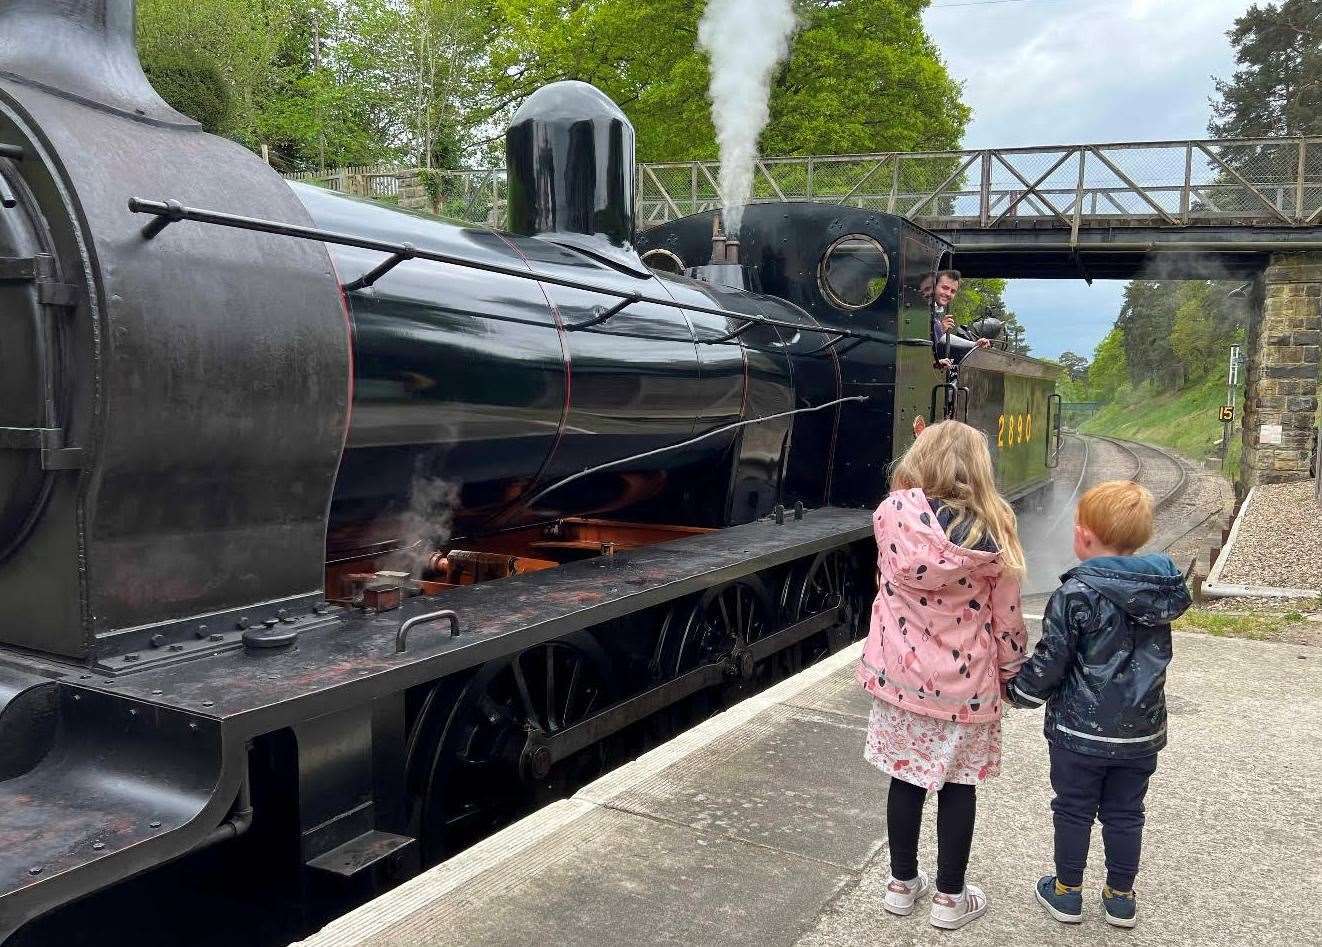 Children can meet Peppa Pig on the platform at Groombridge. Picture: Spa Valley Railway